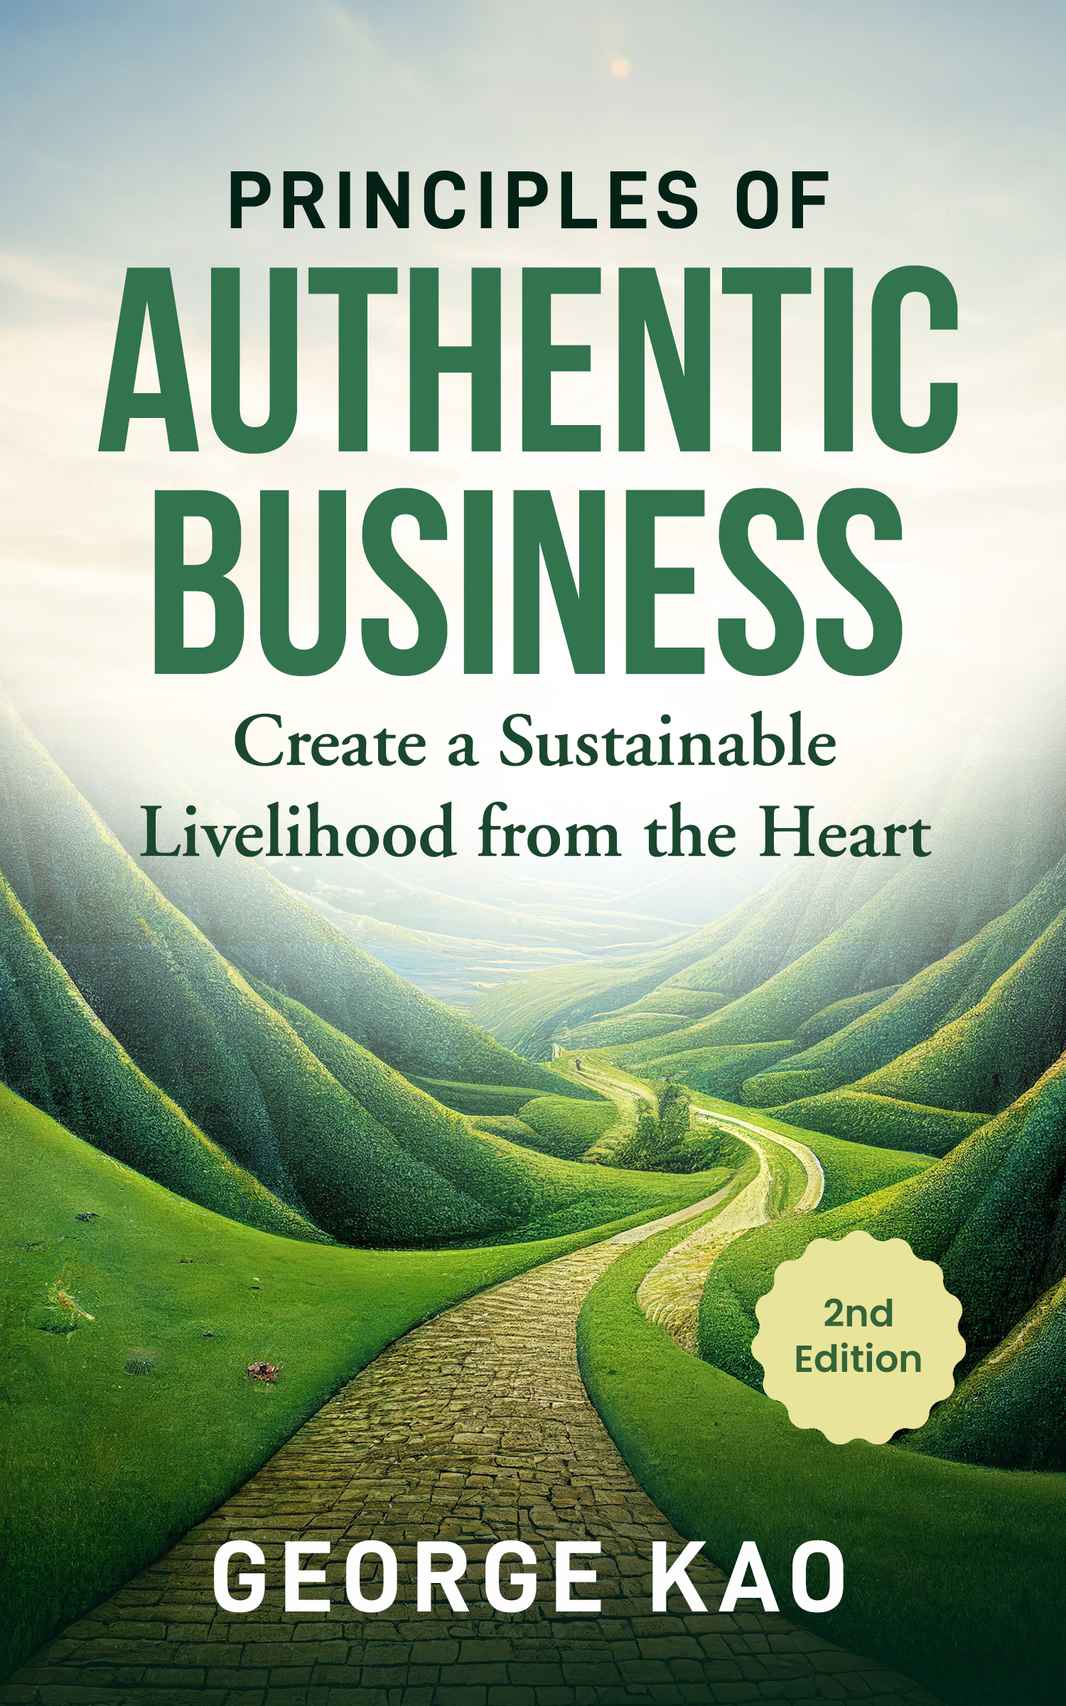 Book Cover Front - 2nd Ed Principles of Authentic Business